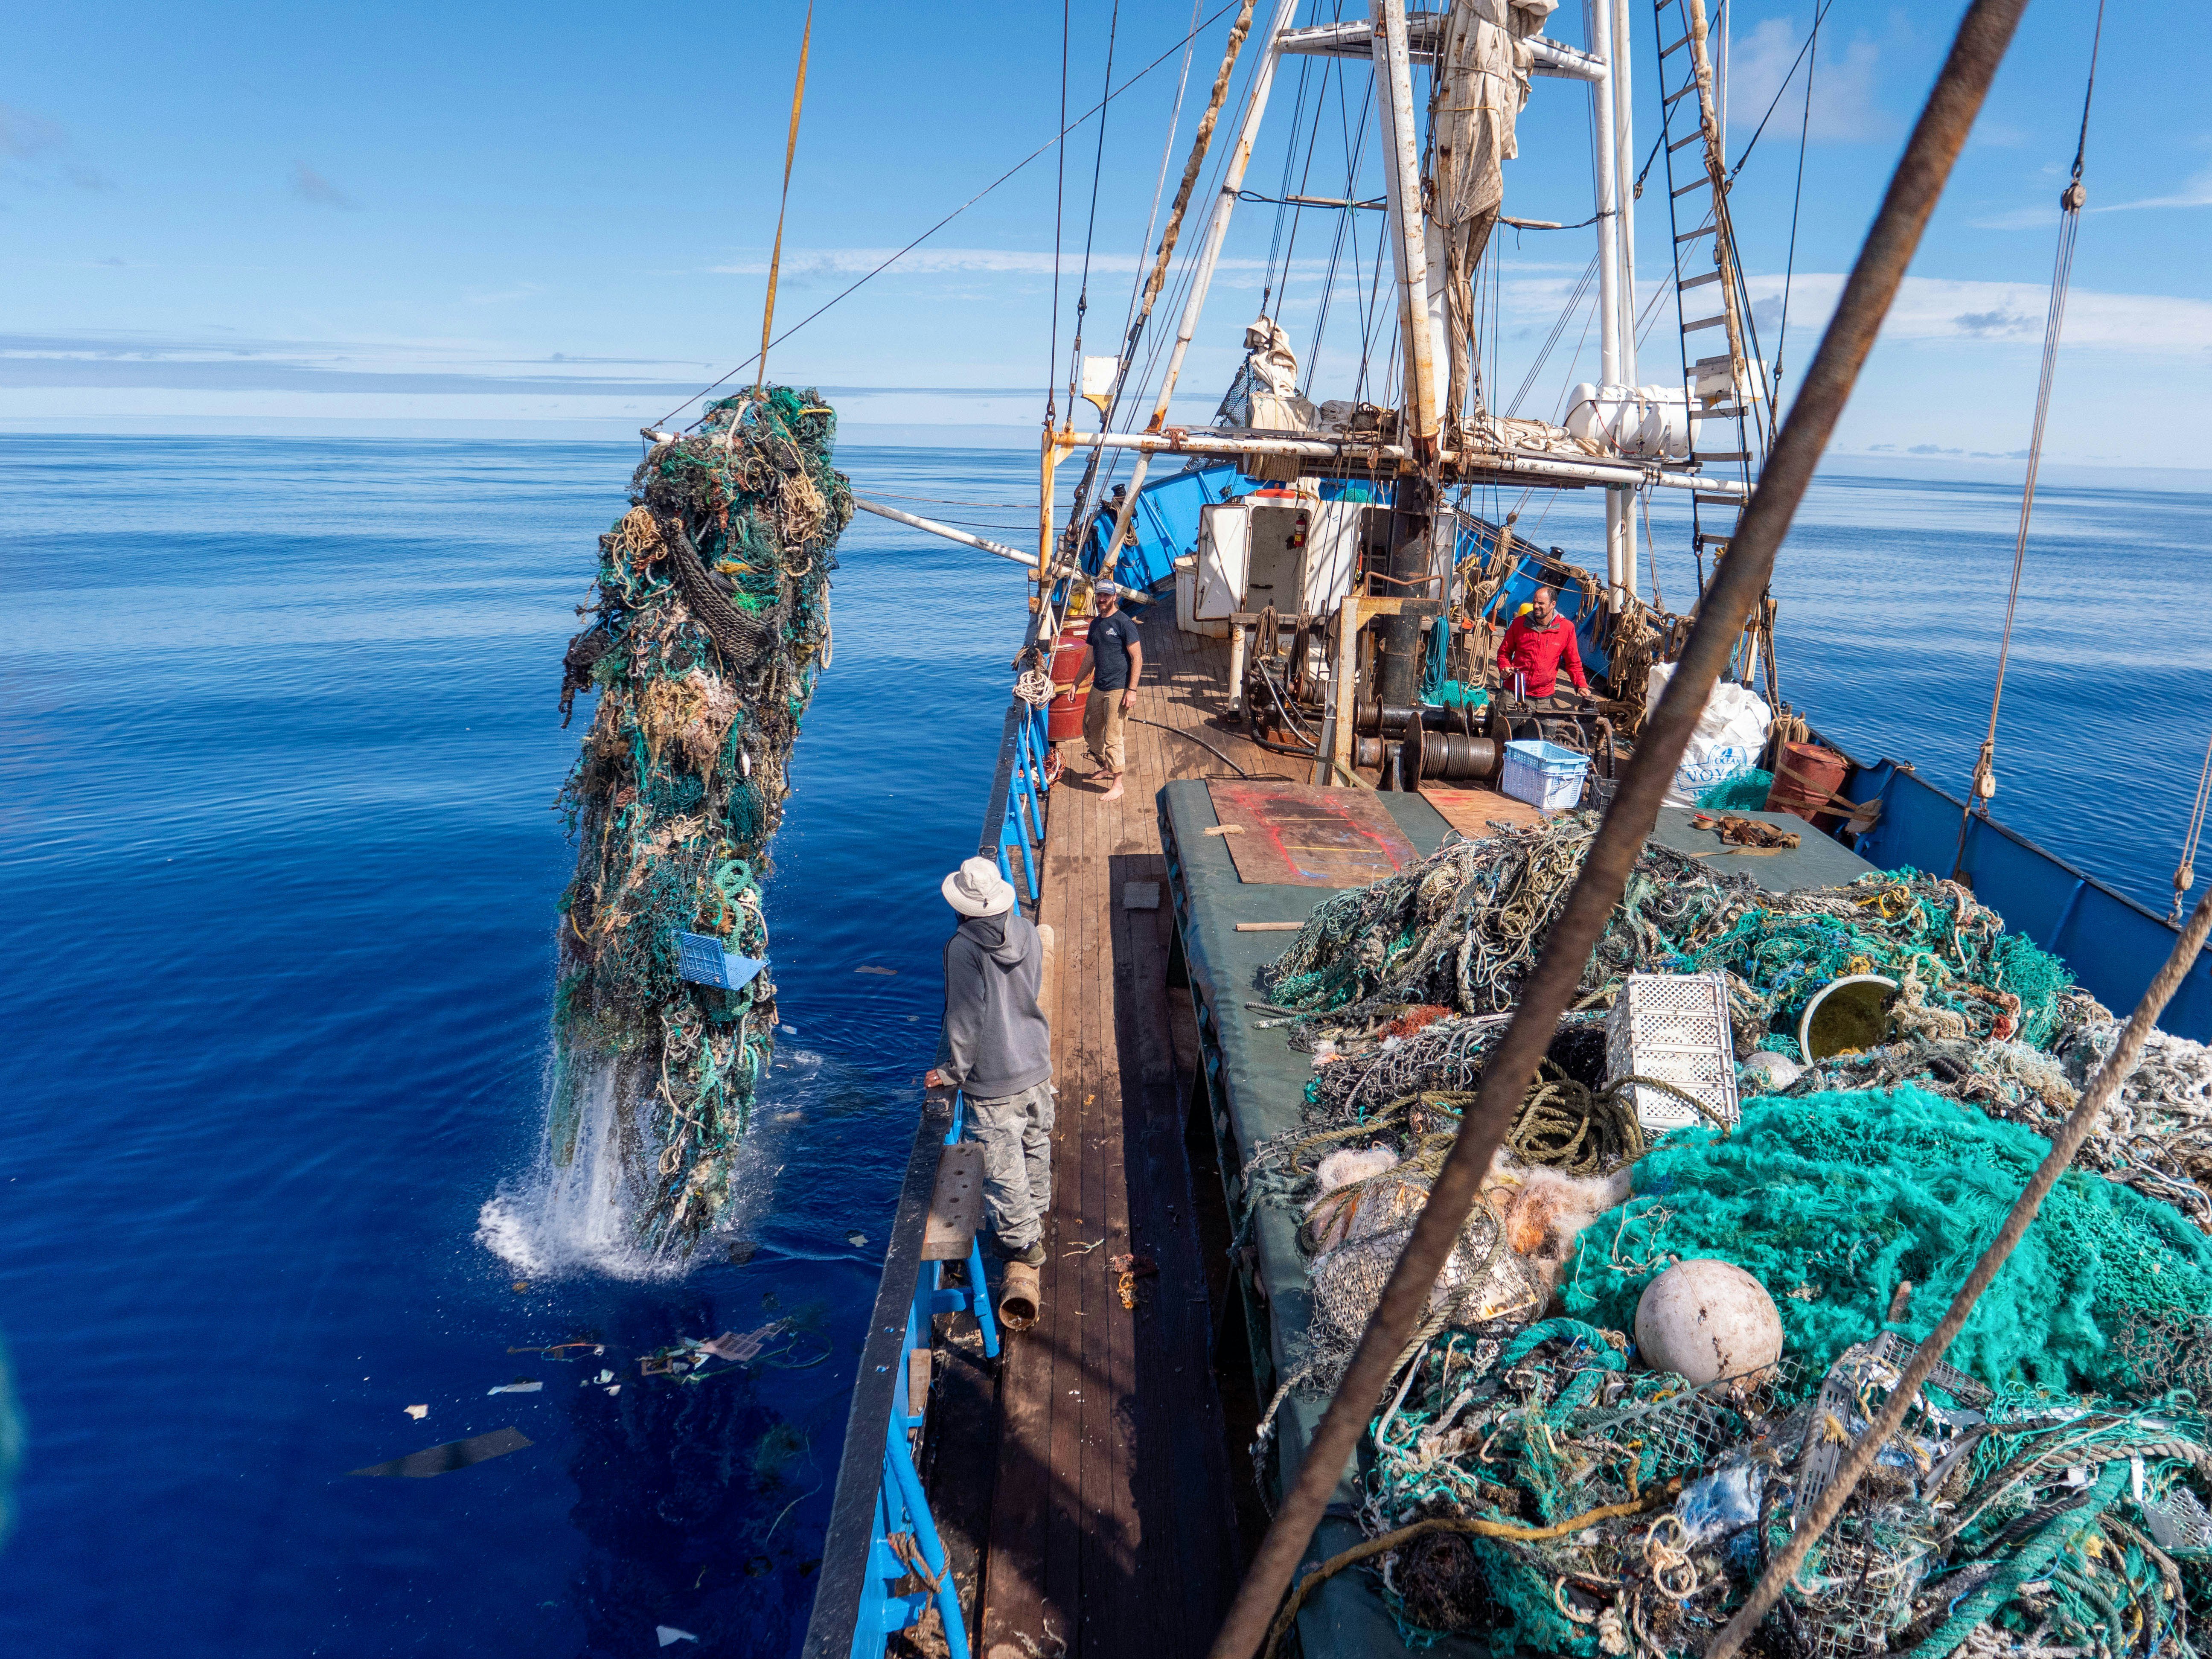 Ocean Voyages Institute cargo ship haul nets from water